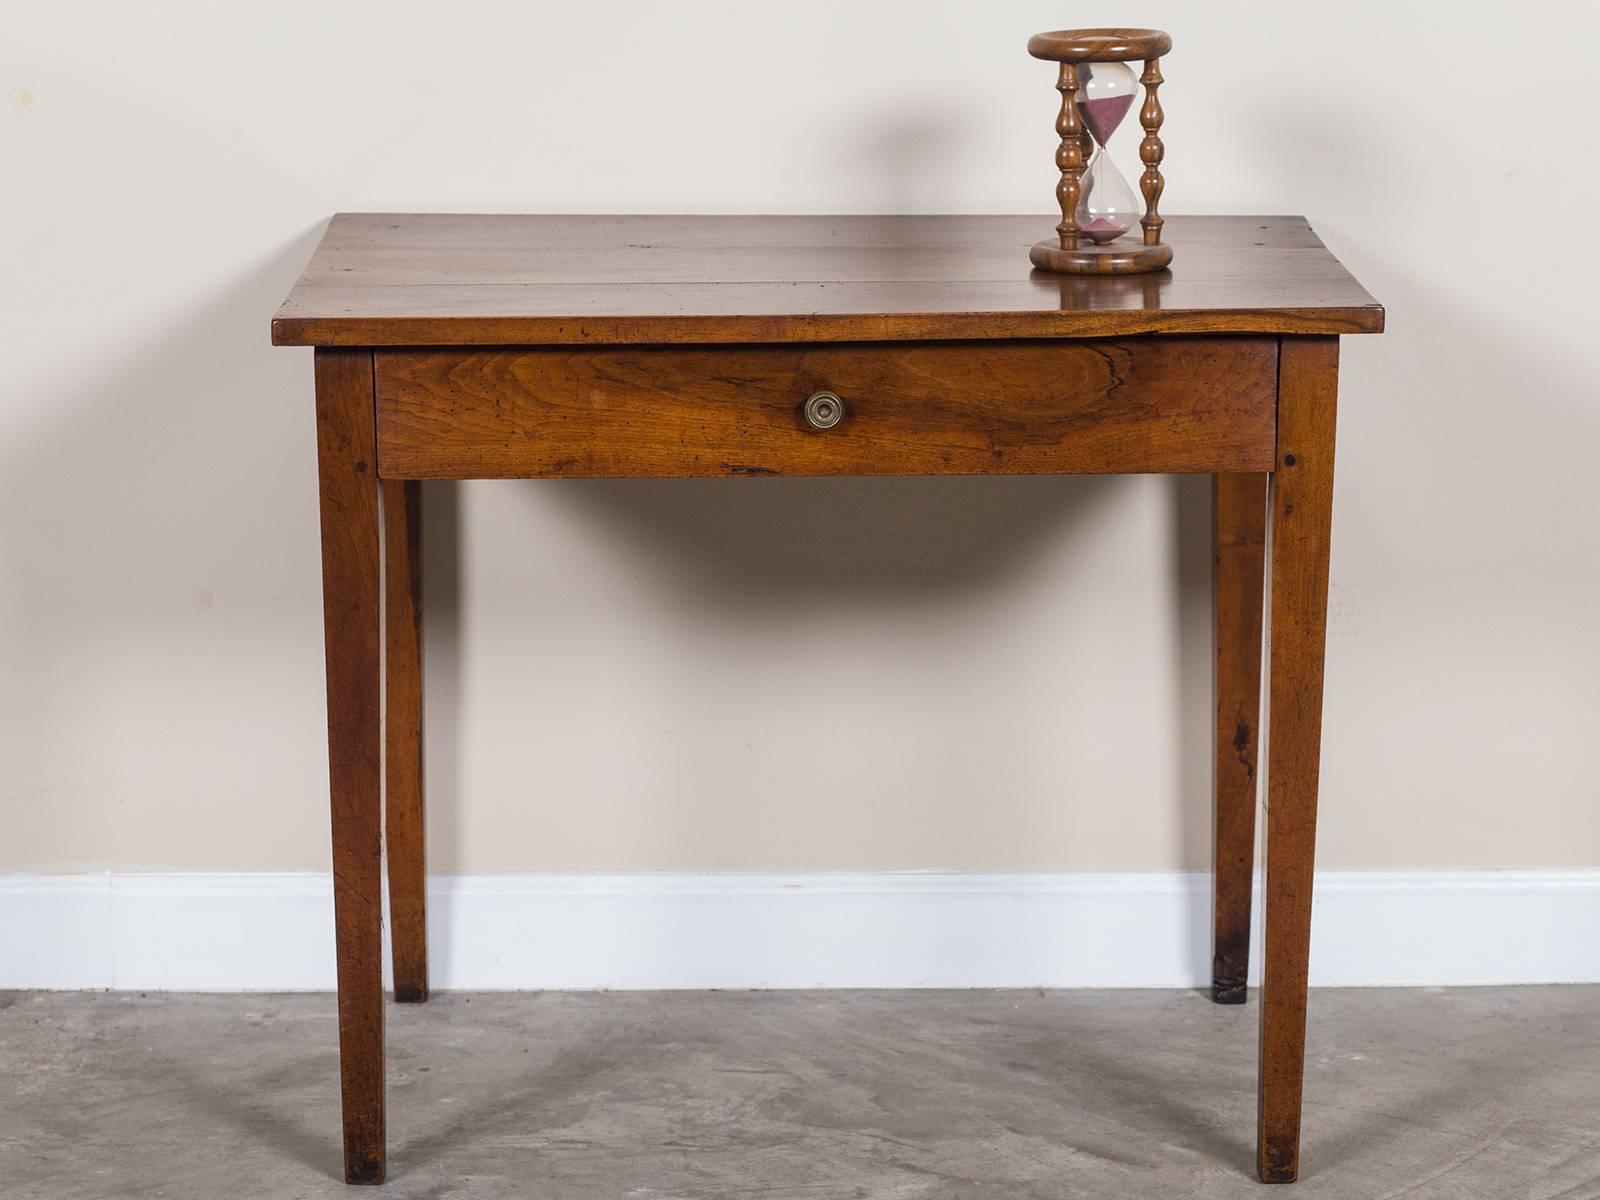 Receive our new selections direct from 1stdibs by email each week. Please click on “Follow Dealer” button below and see them first!

This handsome antique French Louis Philippe walnut table circa 1850 features the clean simple lines of the best